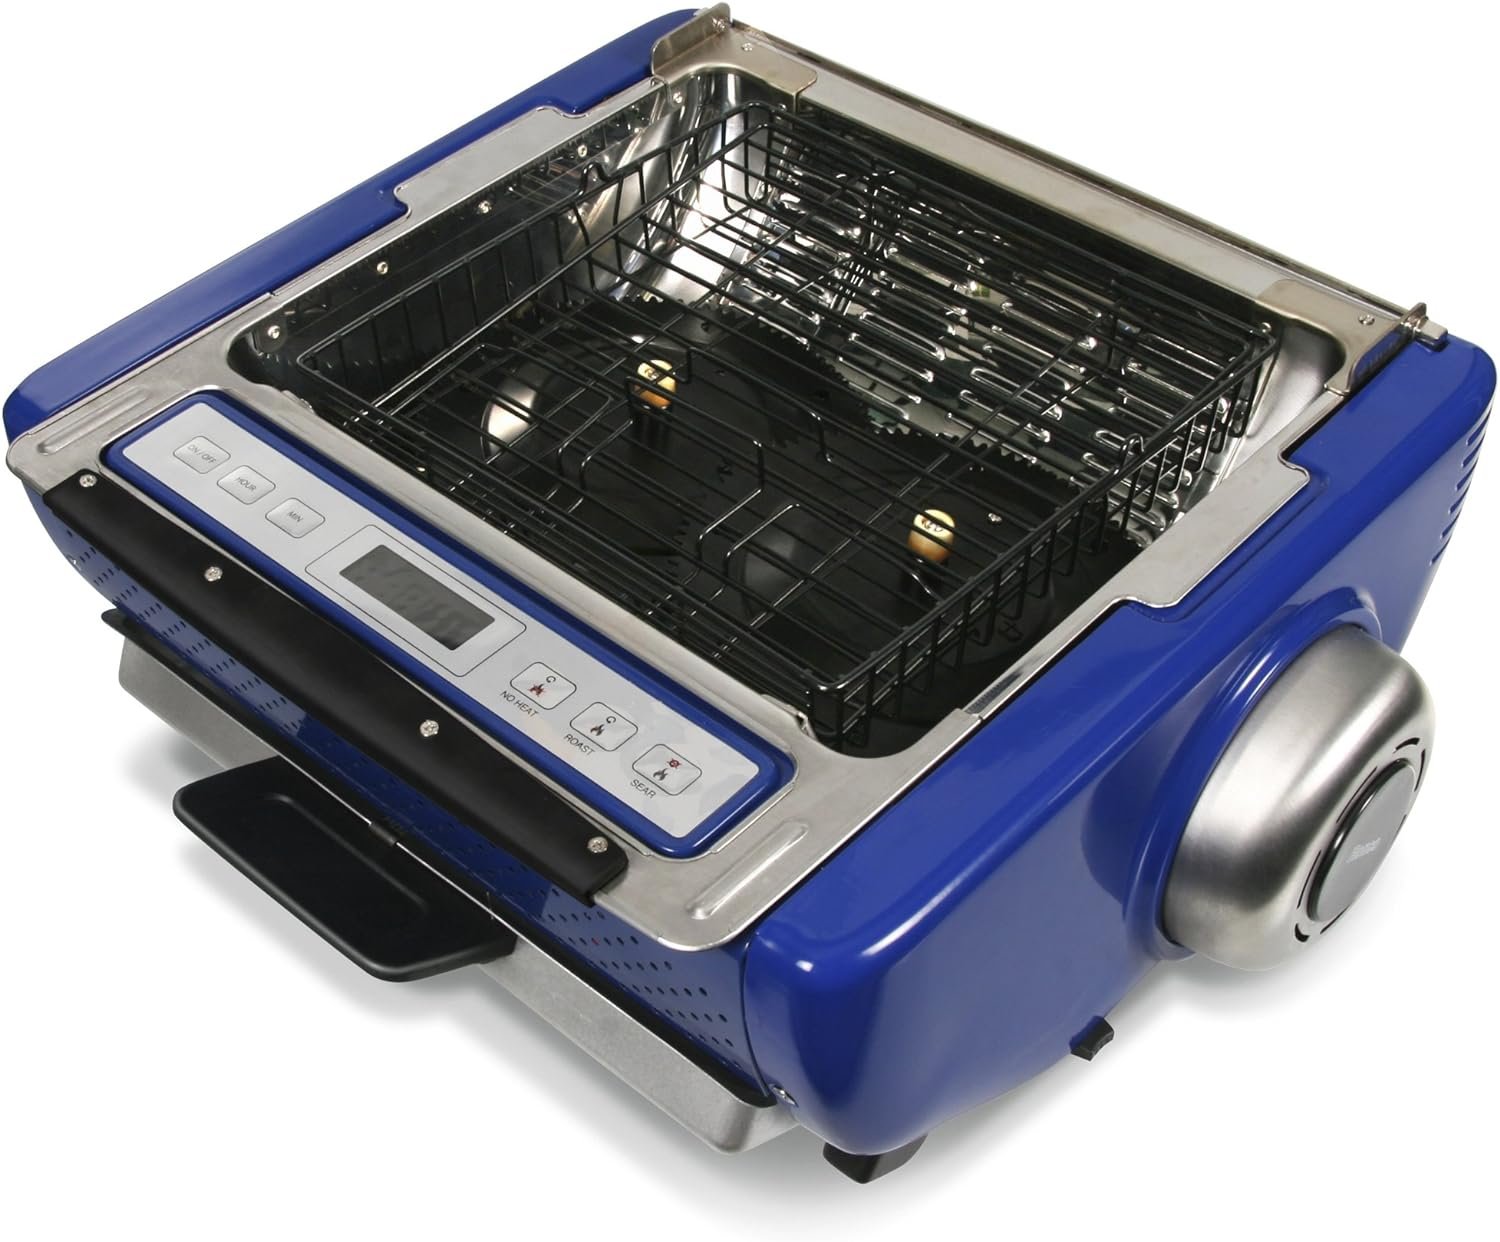 Ronco Digital Showtime Rotisserie and BBQ Oven, Blue